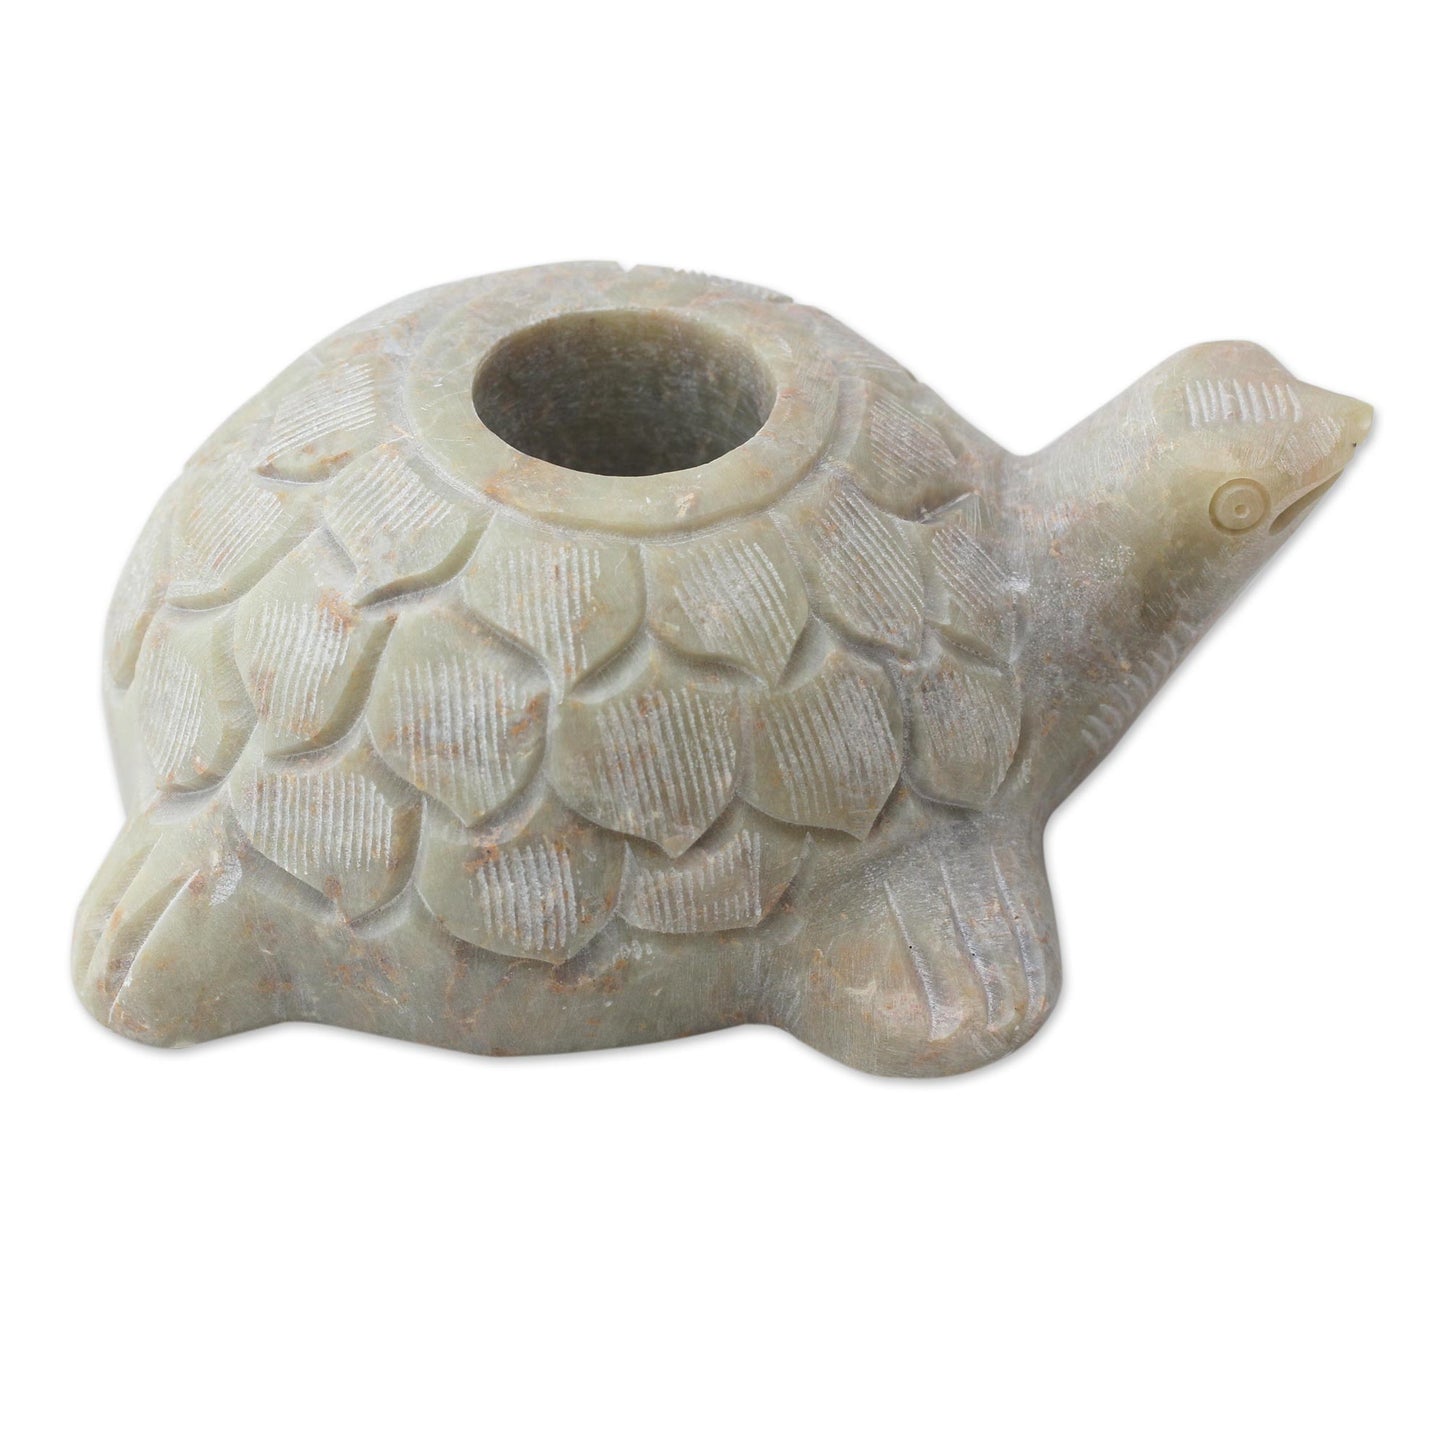 Turtle Delight Turtle Candle Holders Hand Carved from Soapstone (Pair)